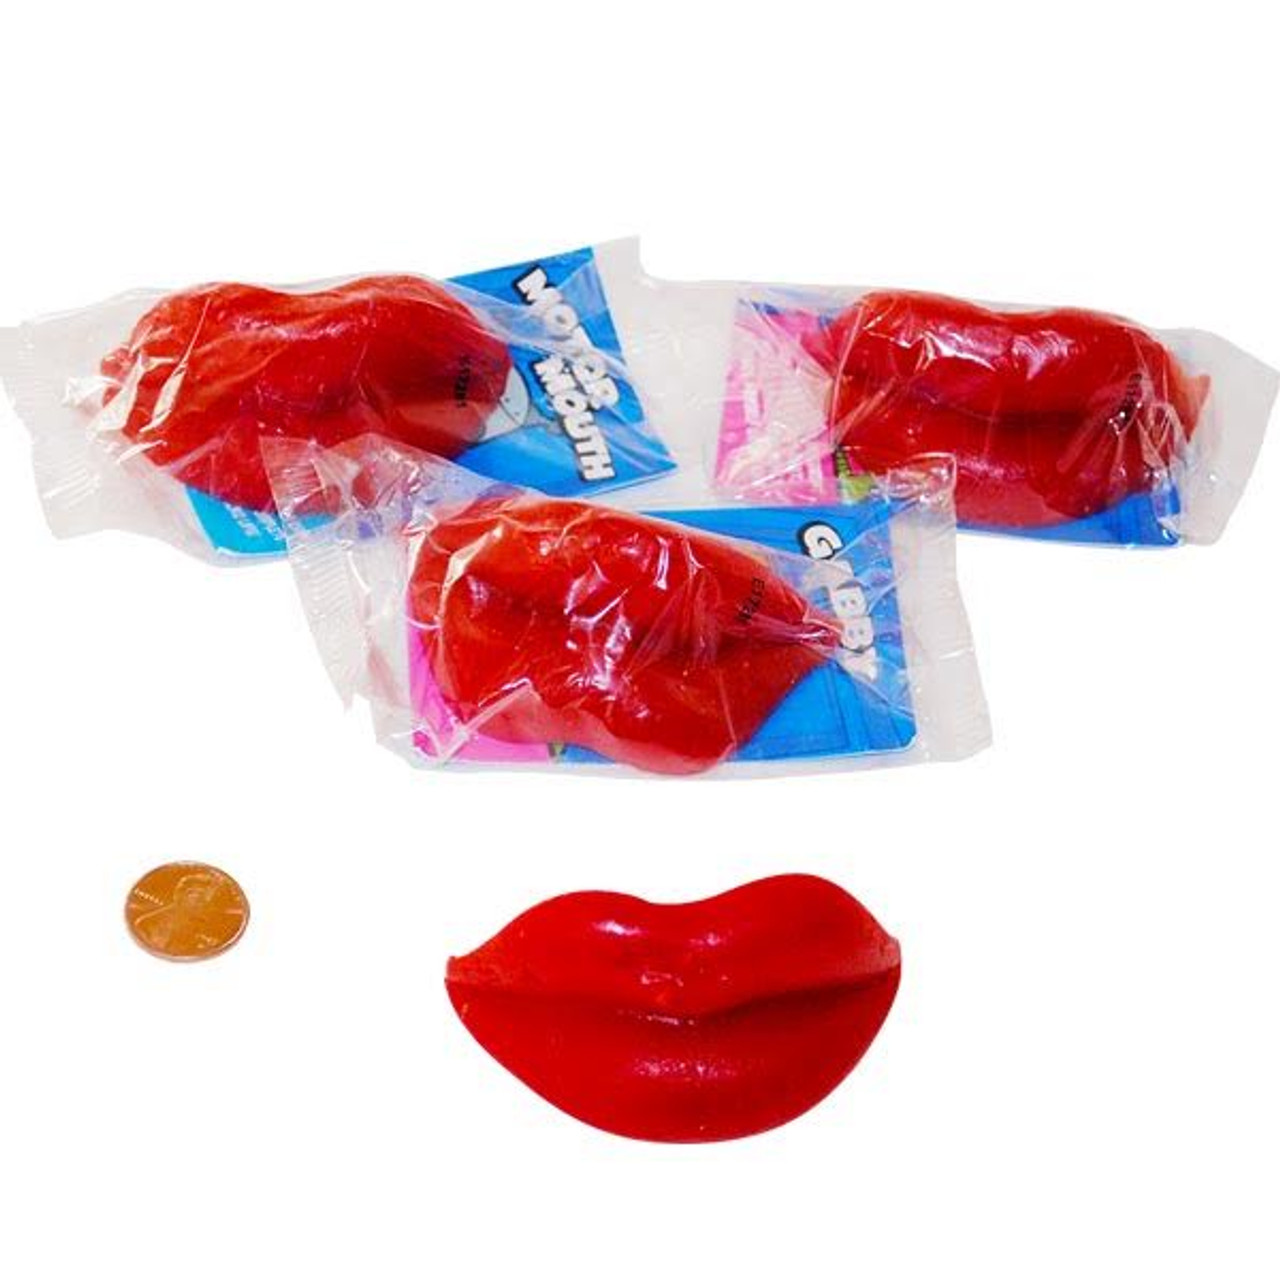 Red Wax Lips Fun Novelty Candy 9186